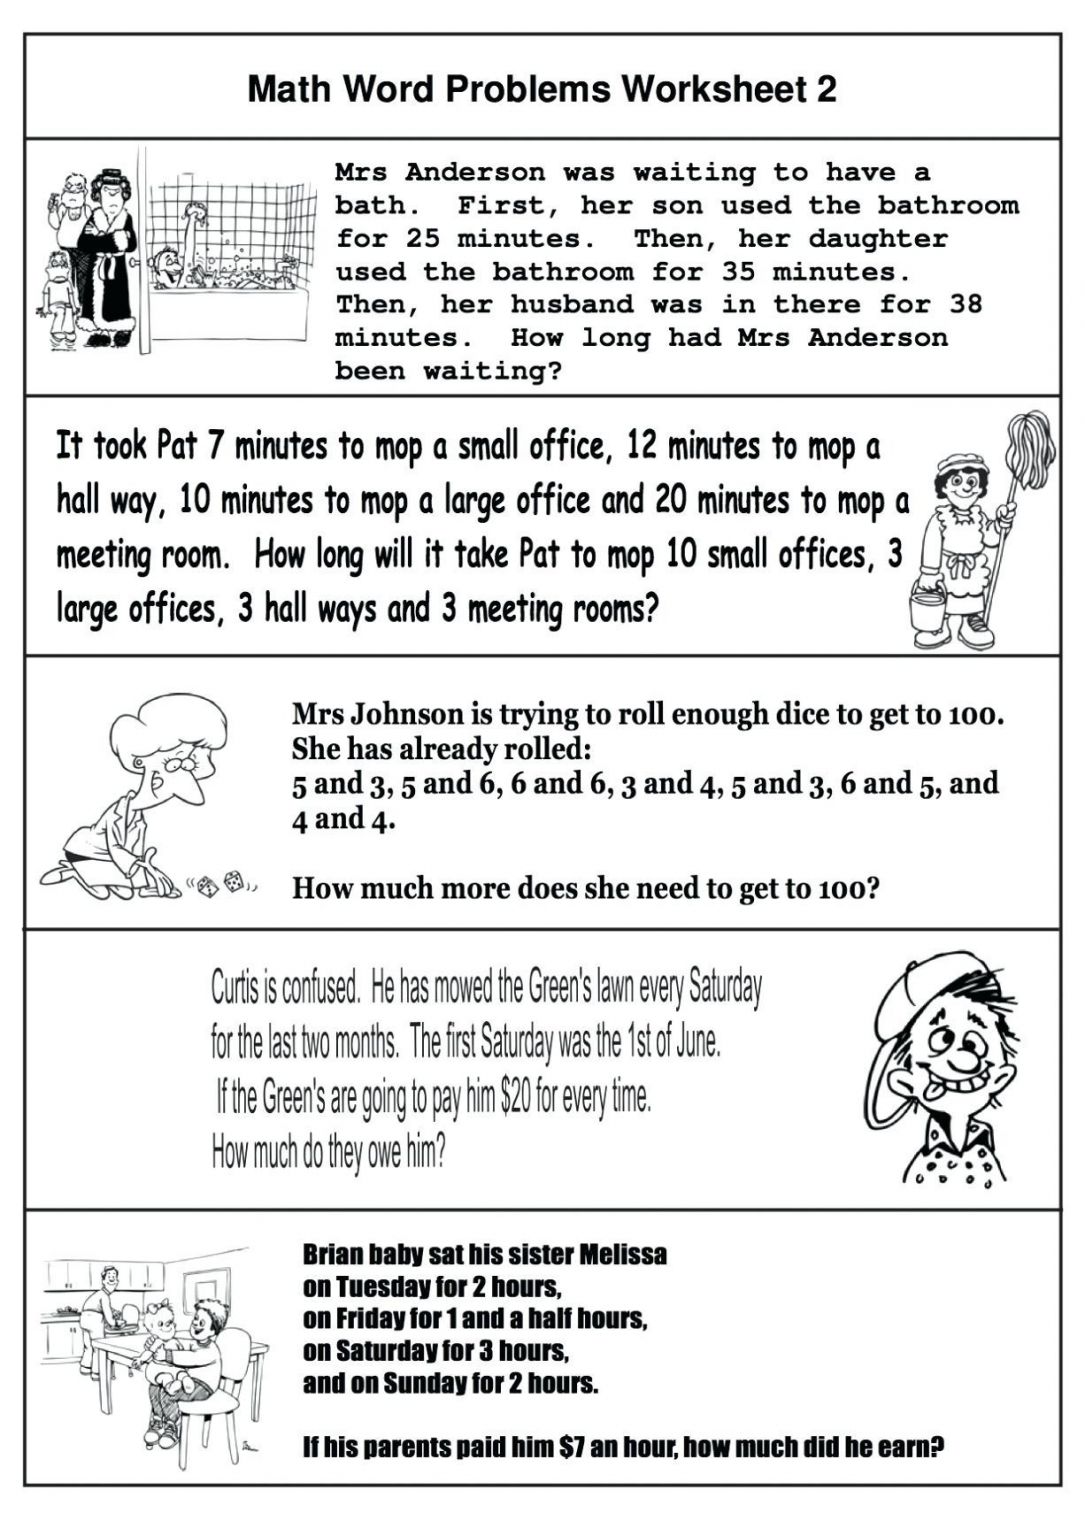 5-free-math-worksheets-fourth-grade-4-addition-adding-3-digit-and-1-digit-numbers-amp